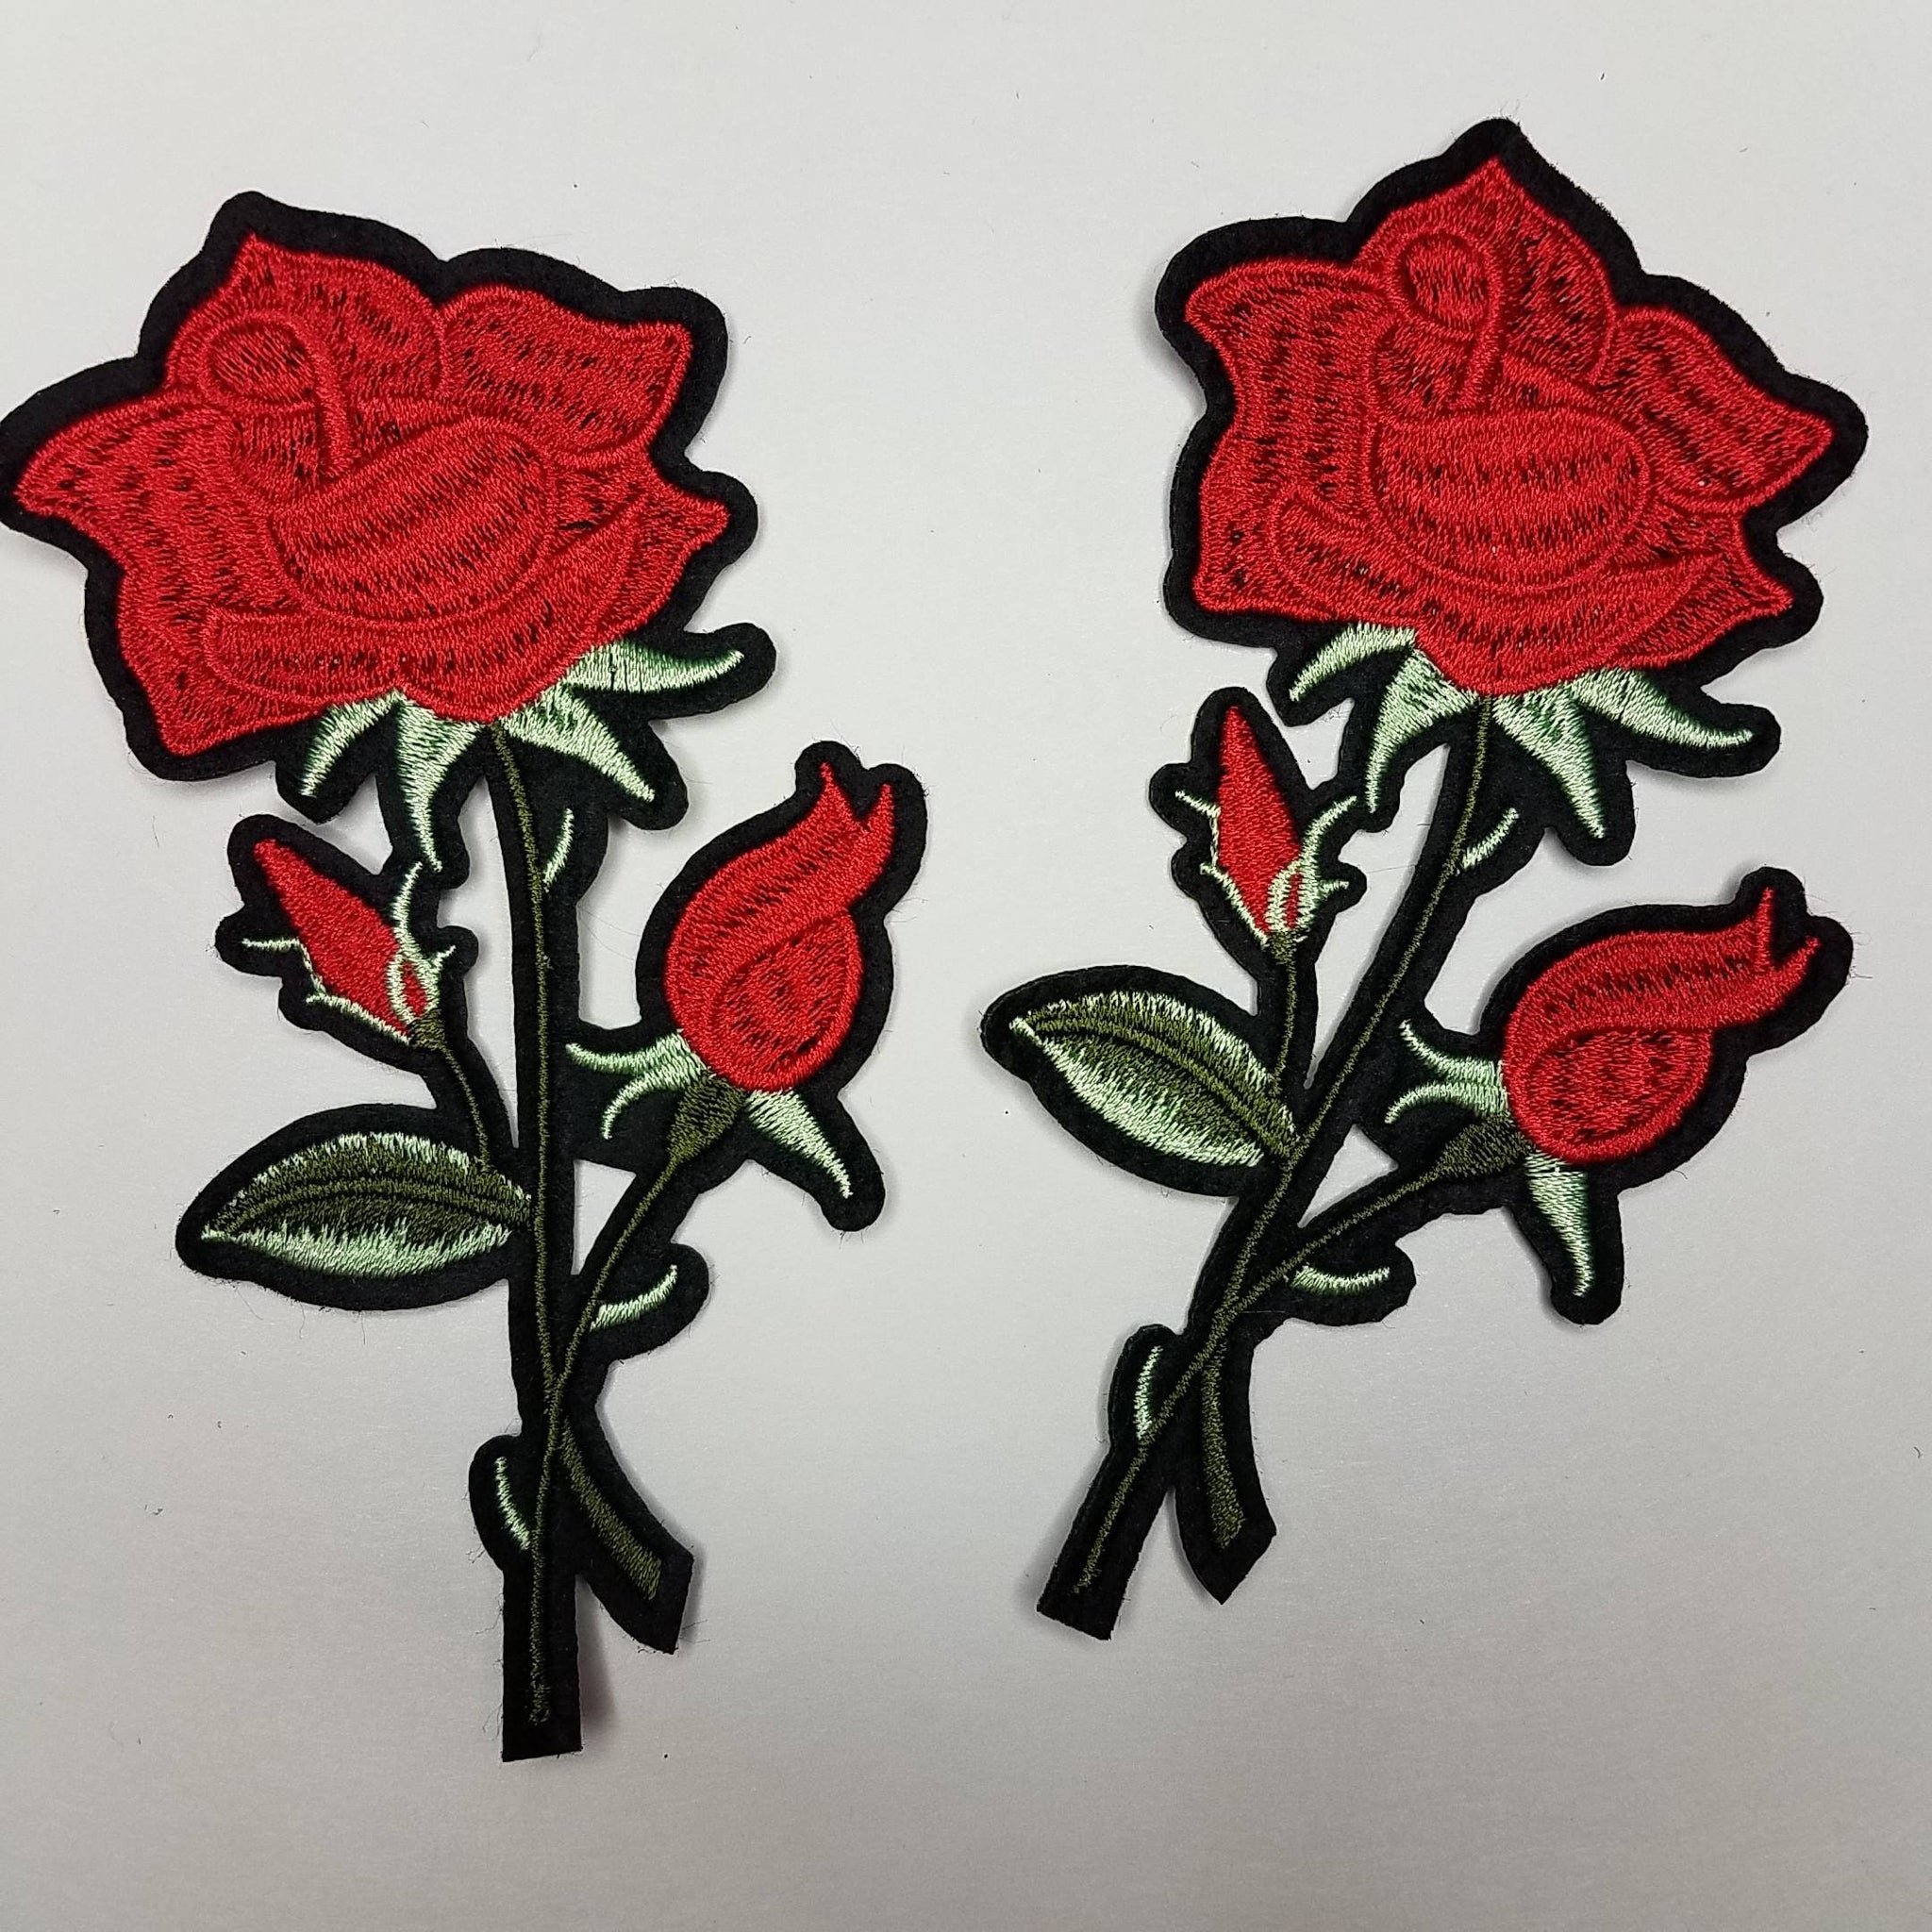 Adorable 2 pc set, Red Roses (size 4-inches), matching embroidered iron-on floral patches (2 pcs), Flower Patches, Rose Embroidered Patches